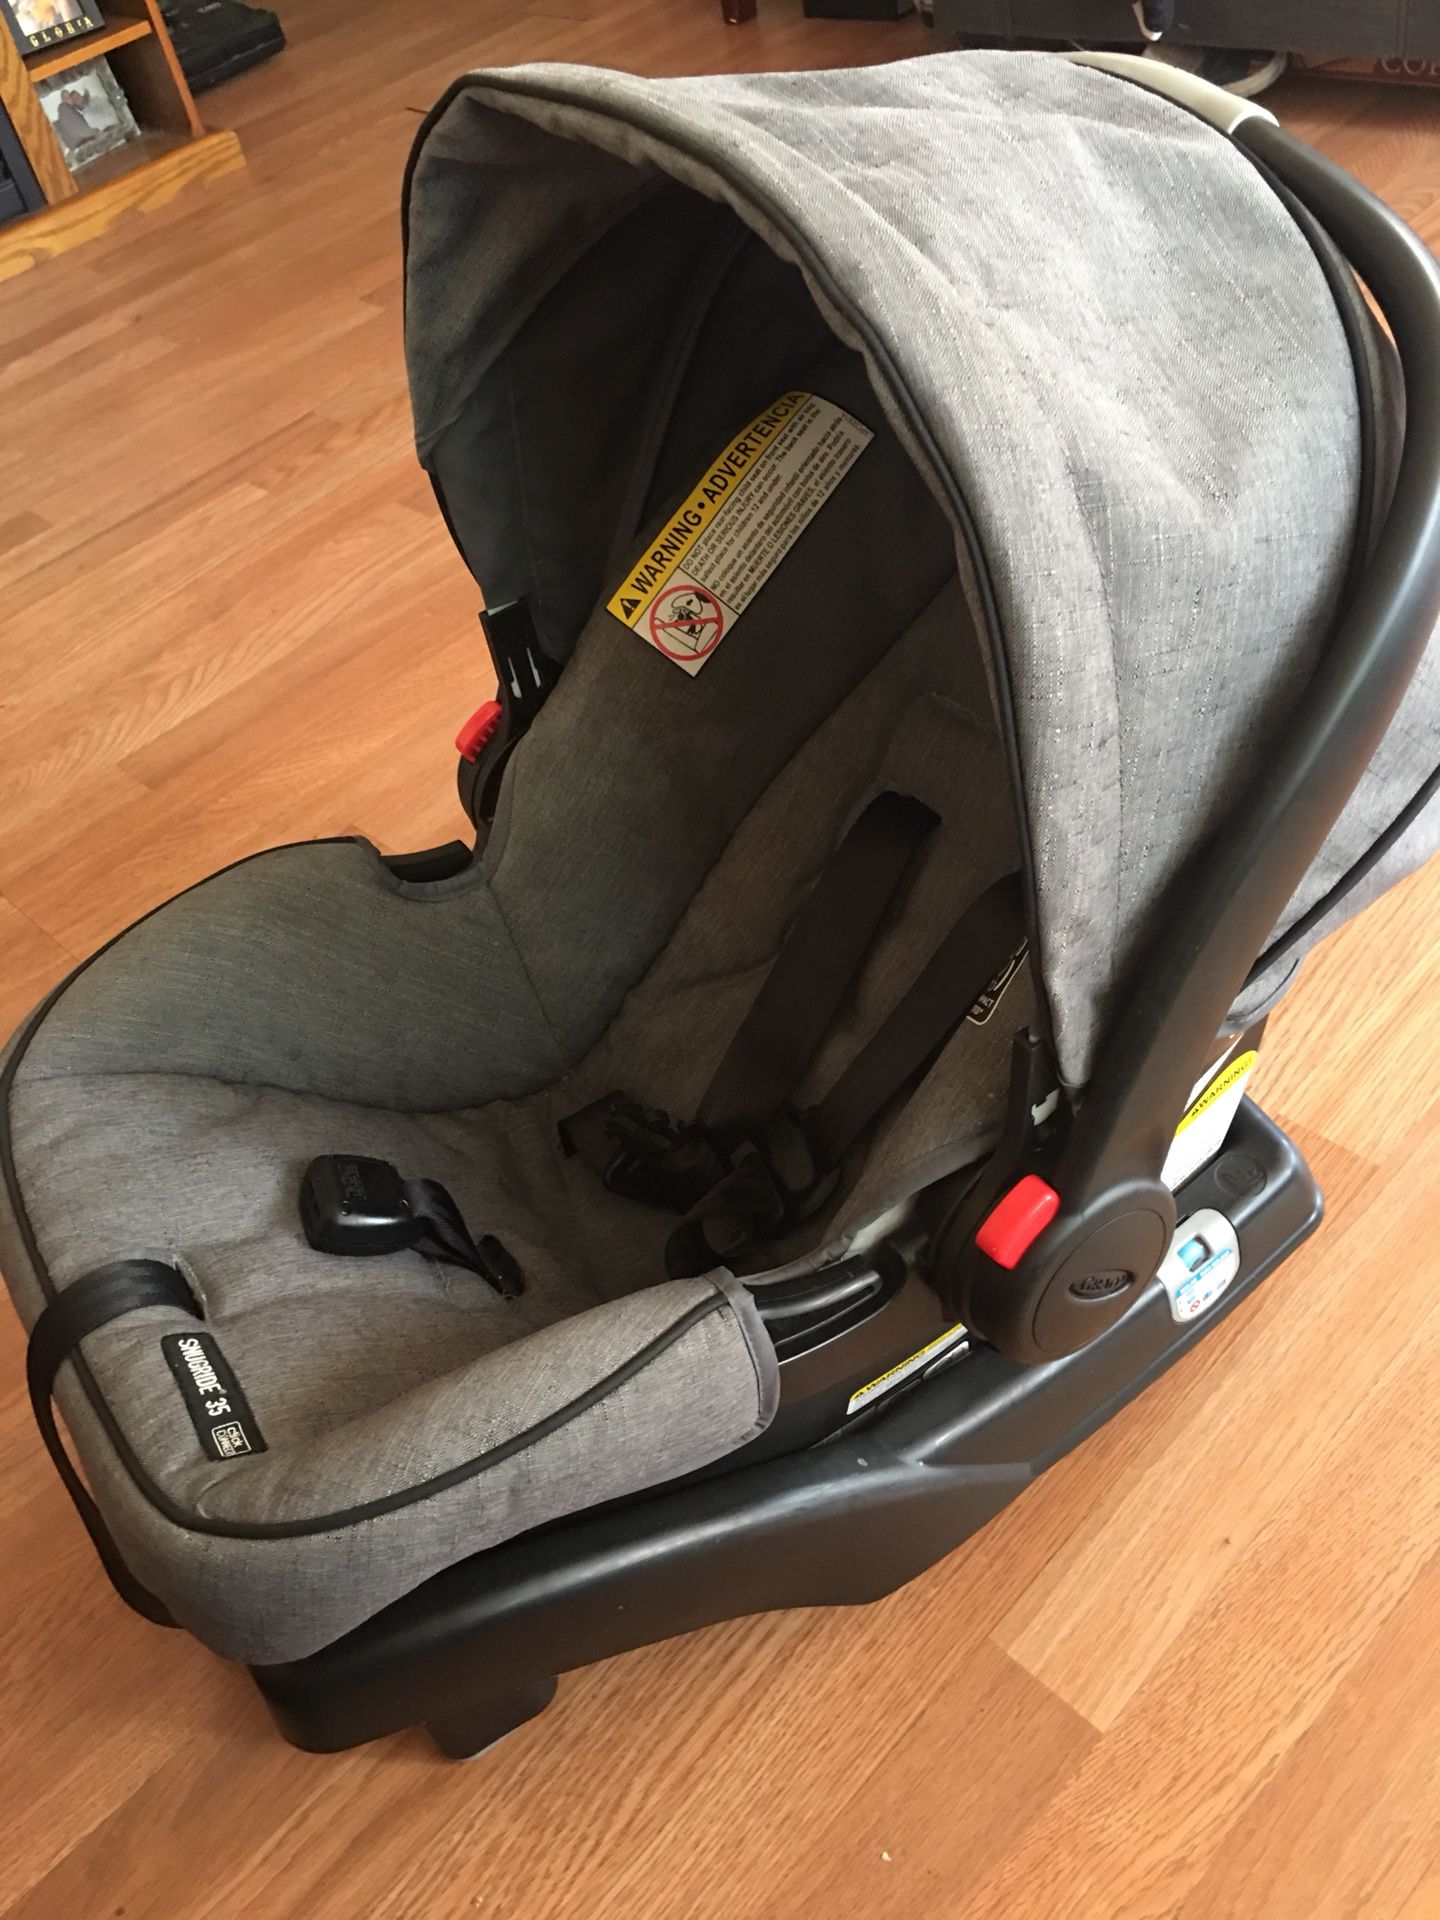 Graco Car Seat for infant